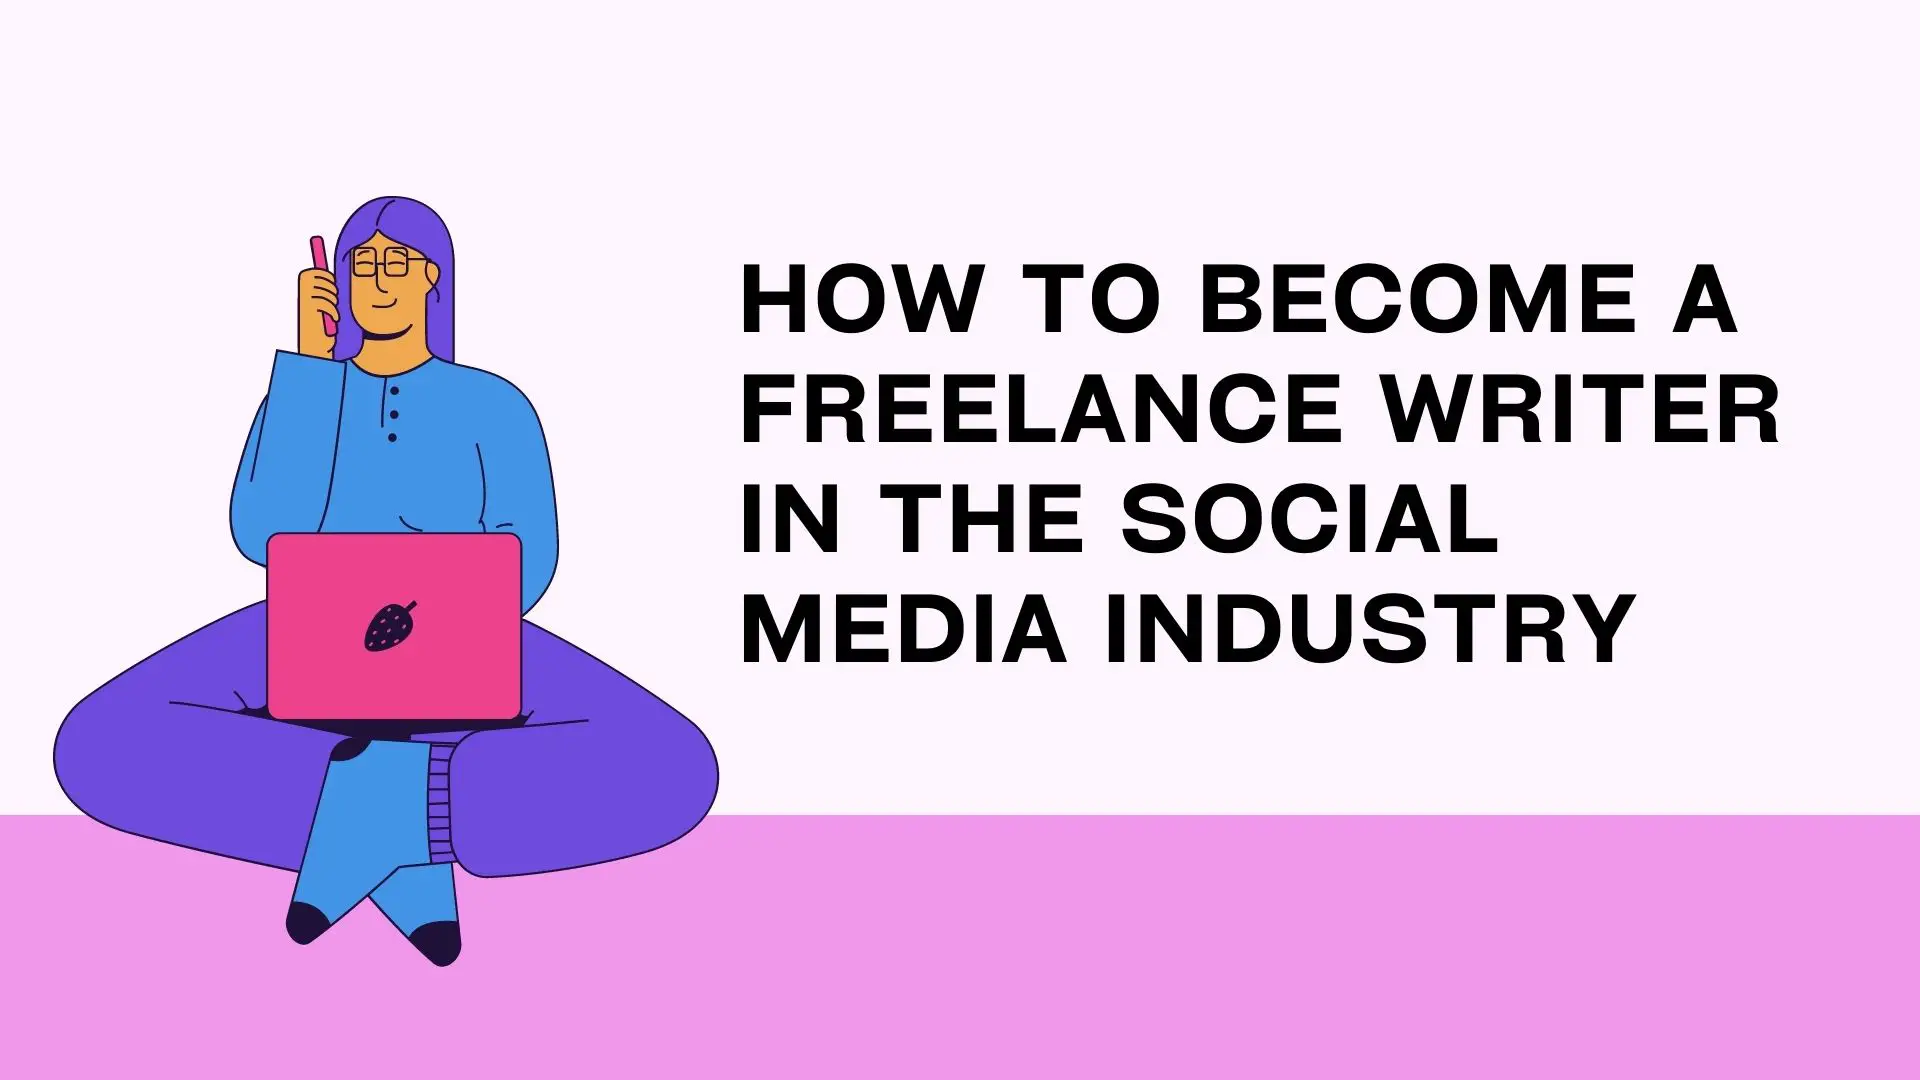 How To Become A Freelance Writer In The Social Media Industry